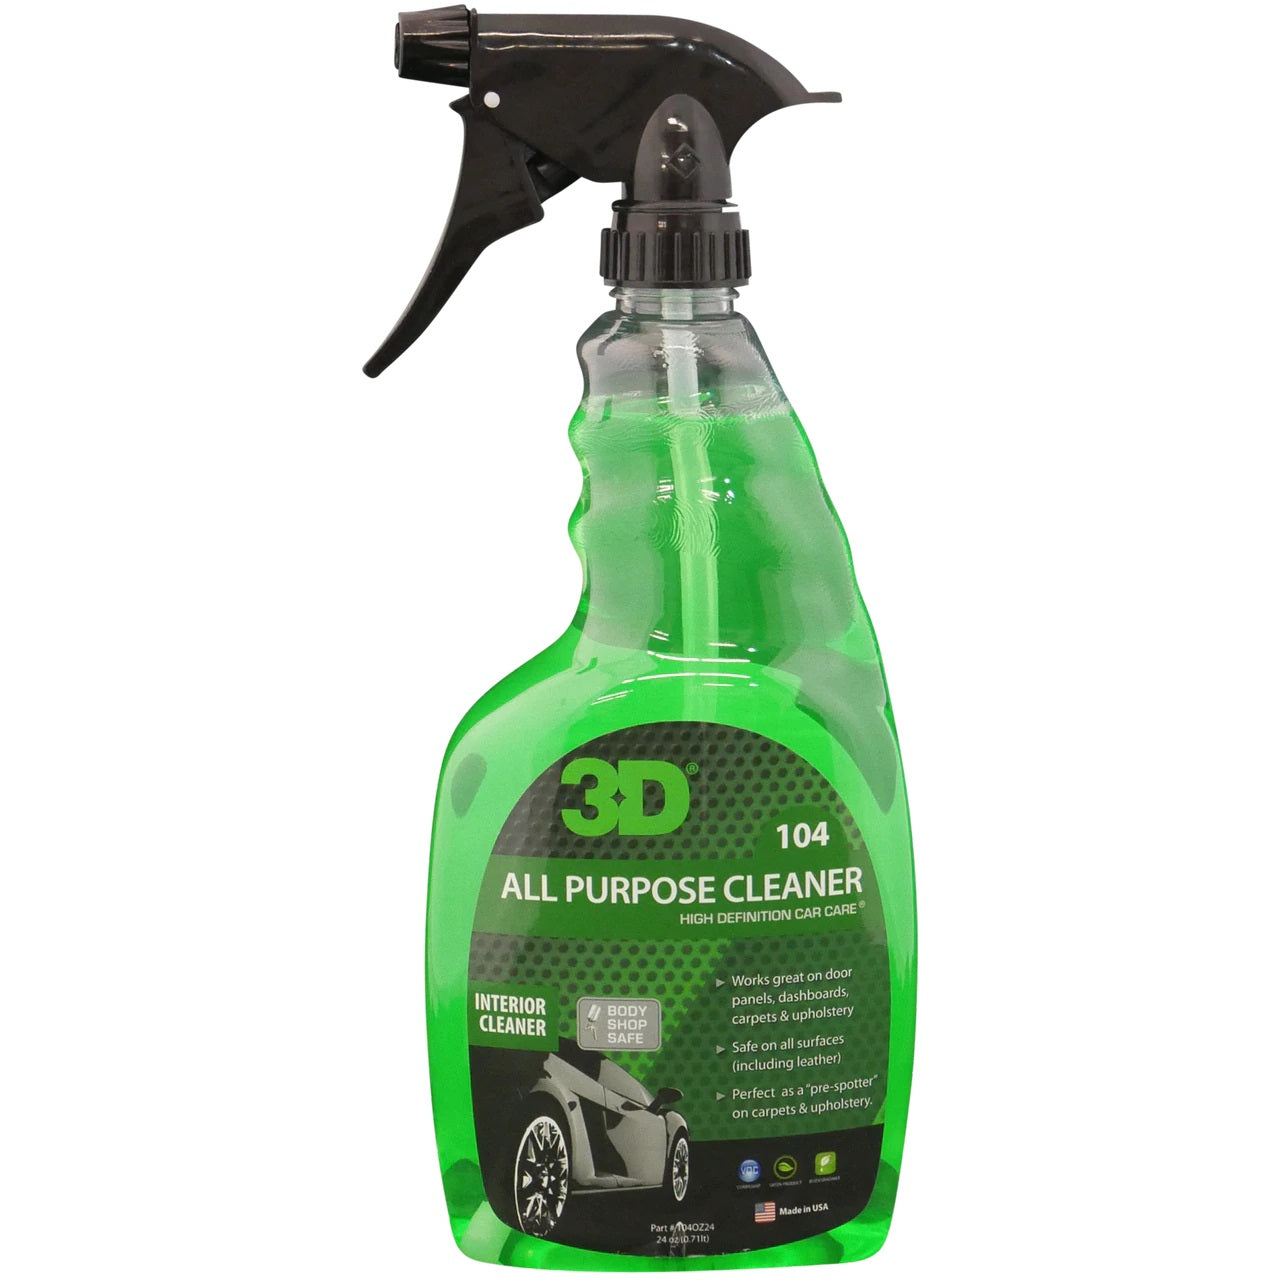 The best all-purpose cleaner (APC) for cleaning your car